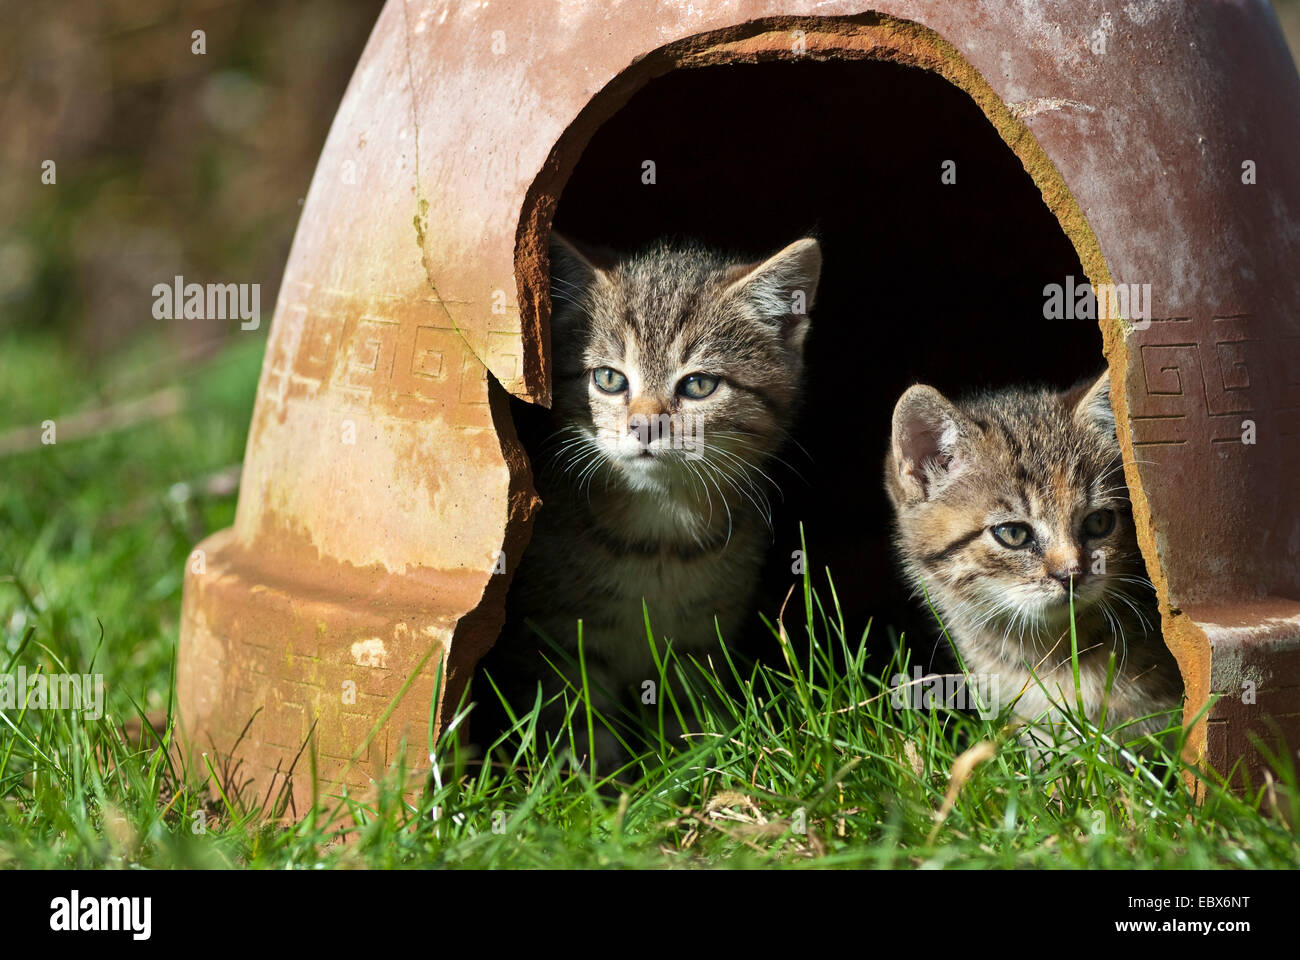 domestic cat, house cat (Felis silvestris f. catus), two kittens looking out from under a clay pot with a hole standing upside down, Germany Stock Photo